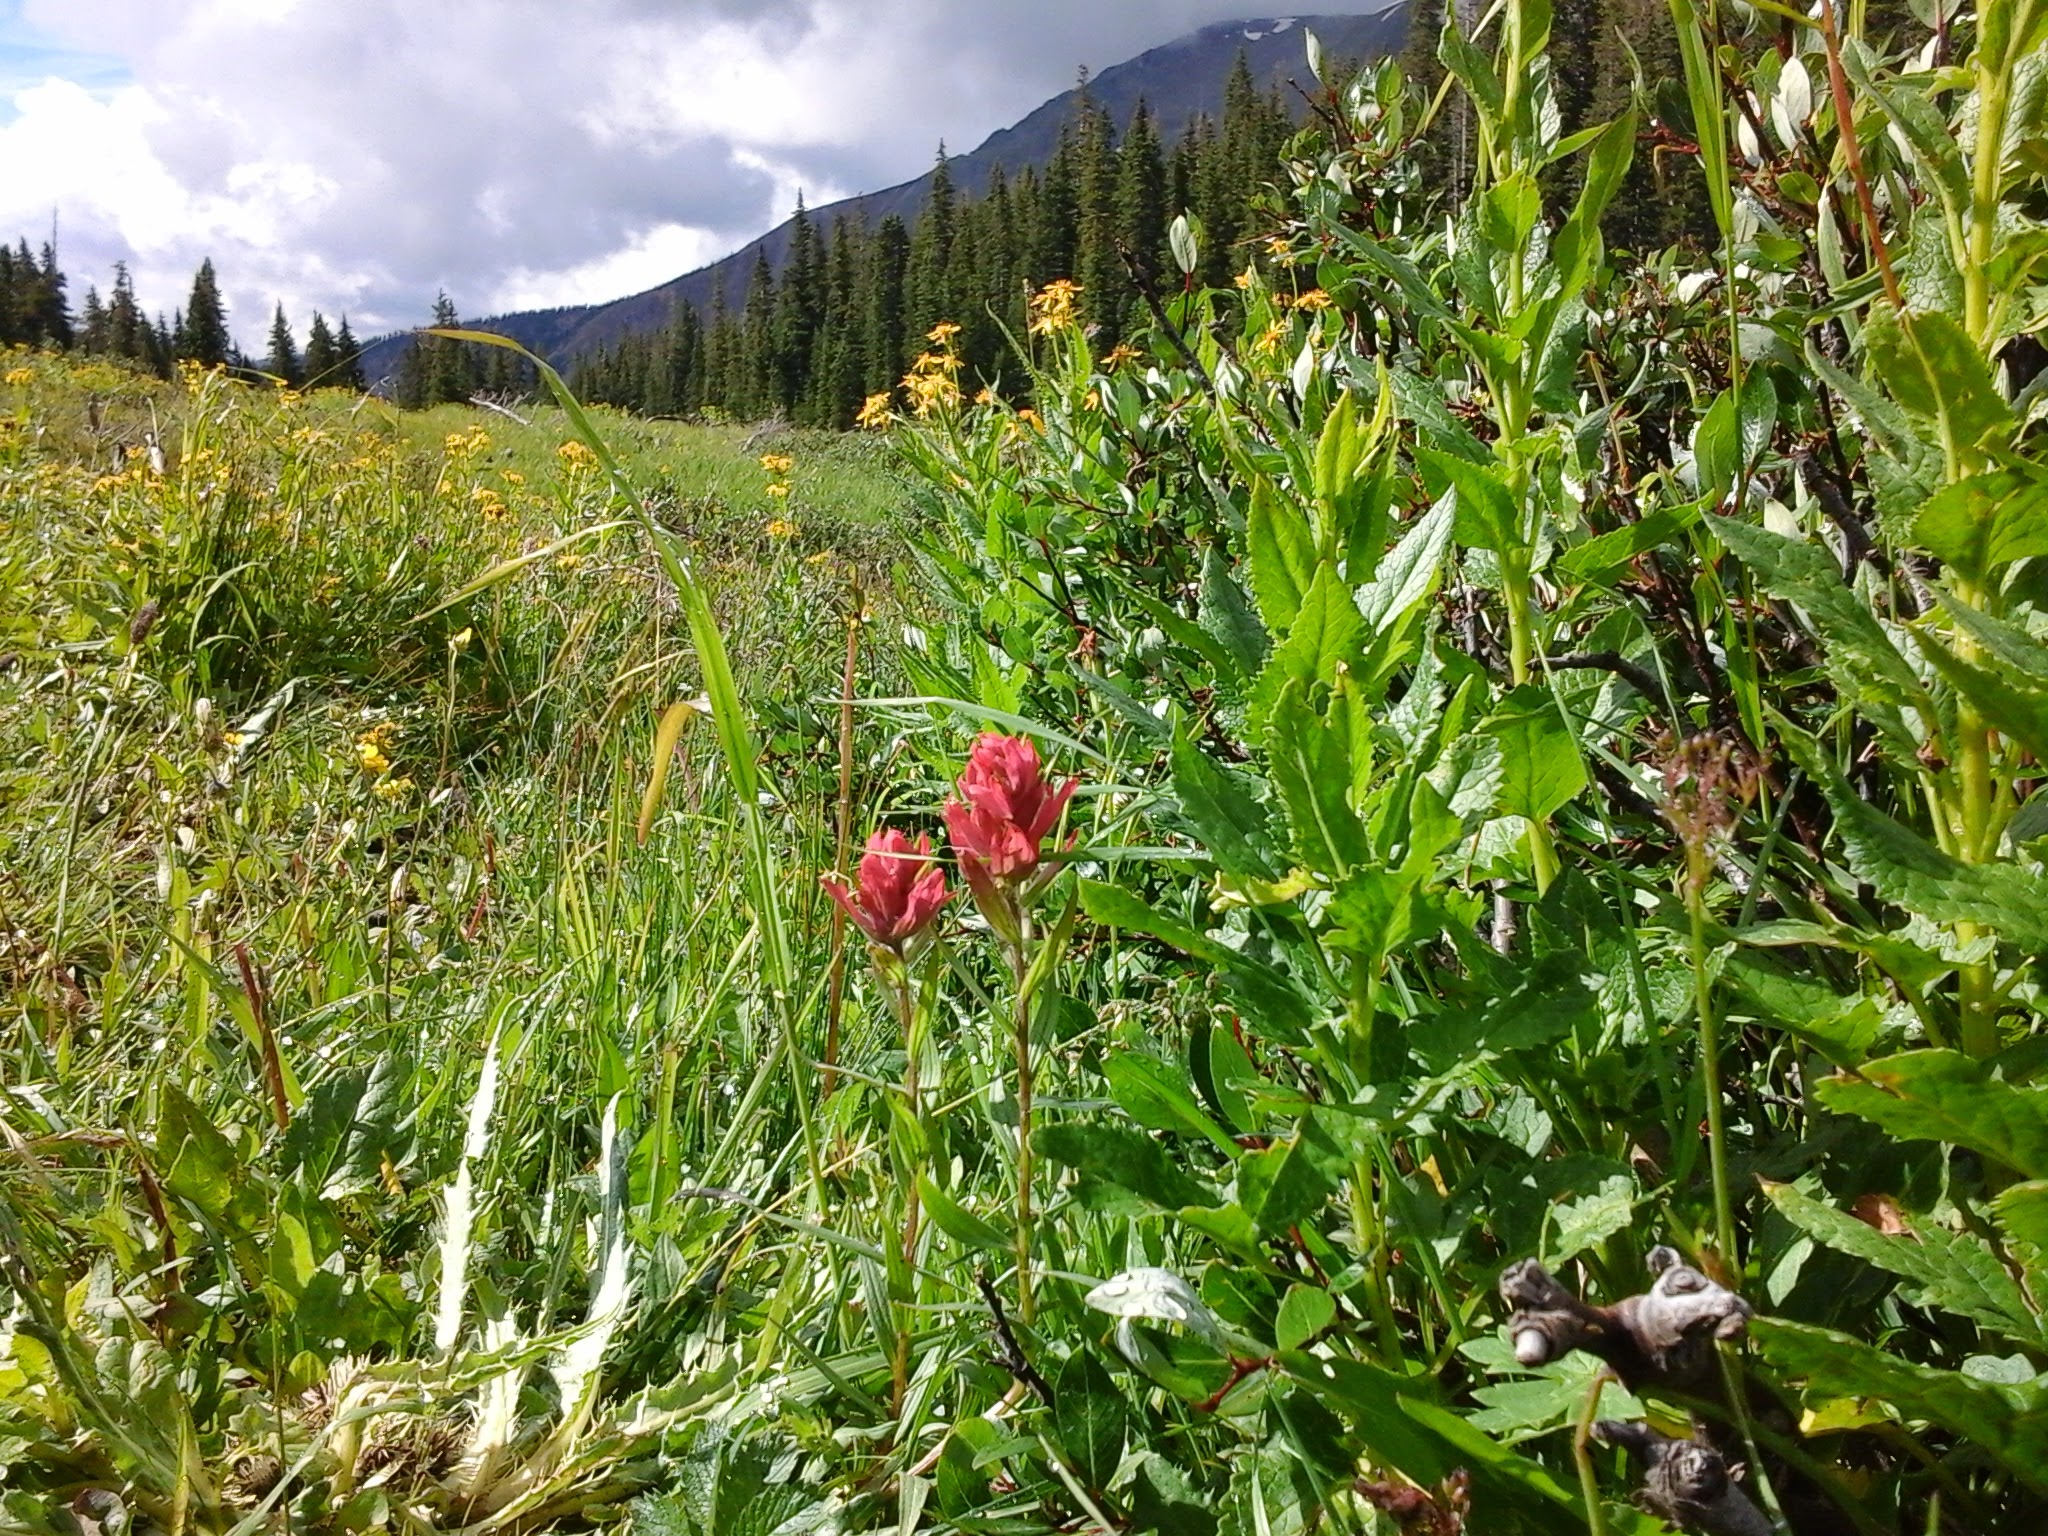 Wildflowers on a mountain side.